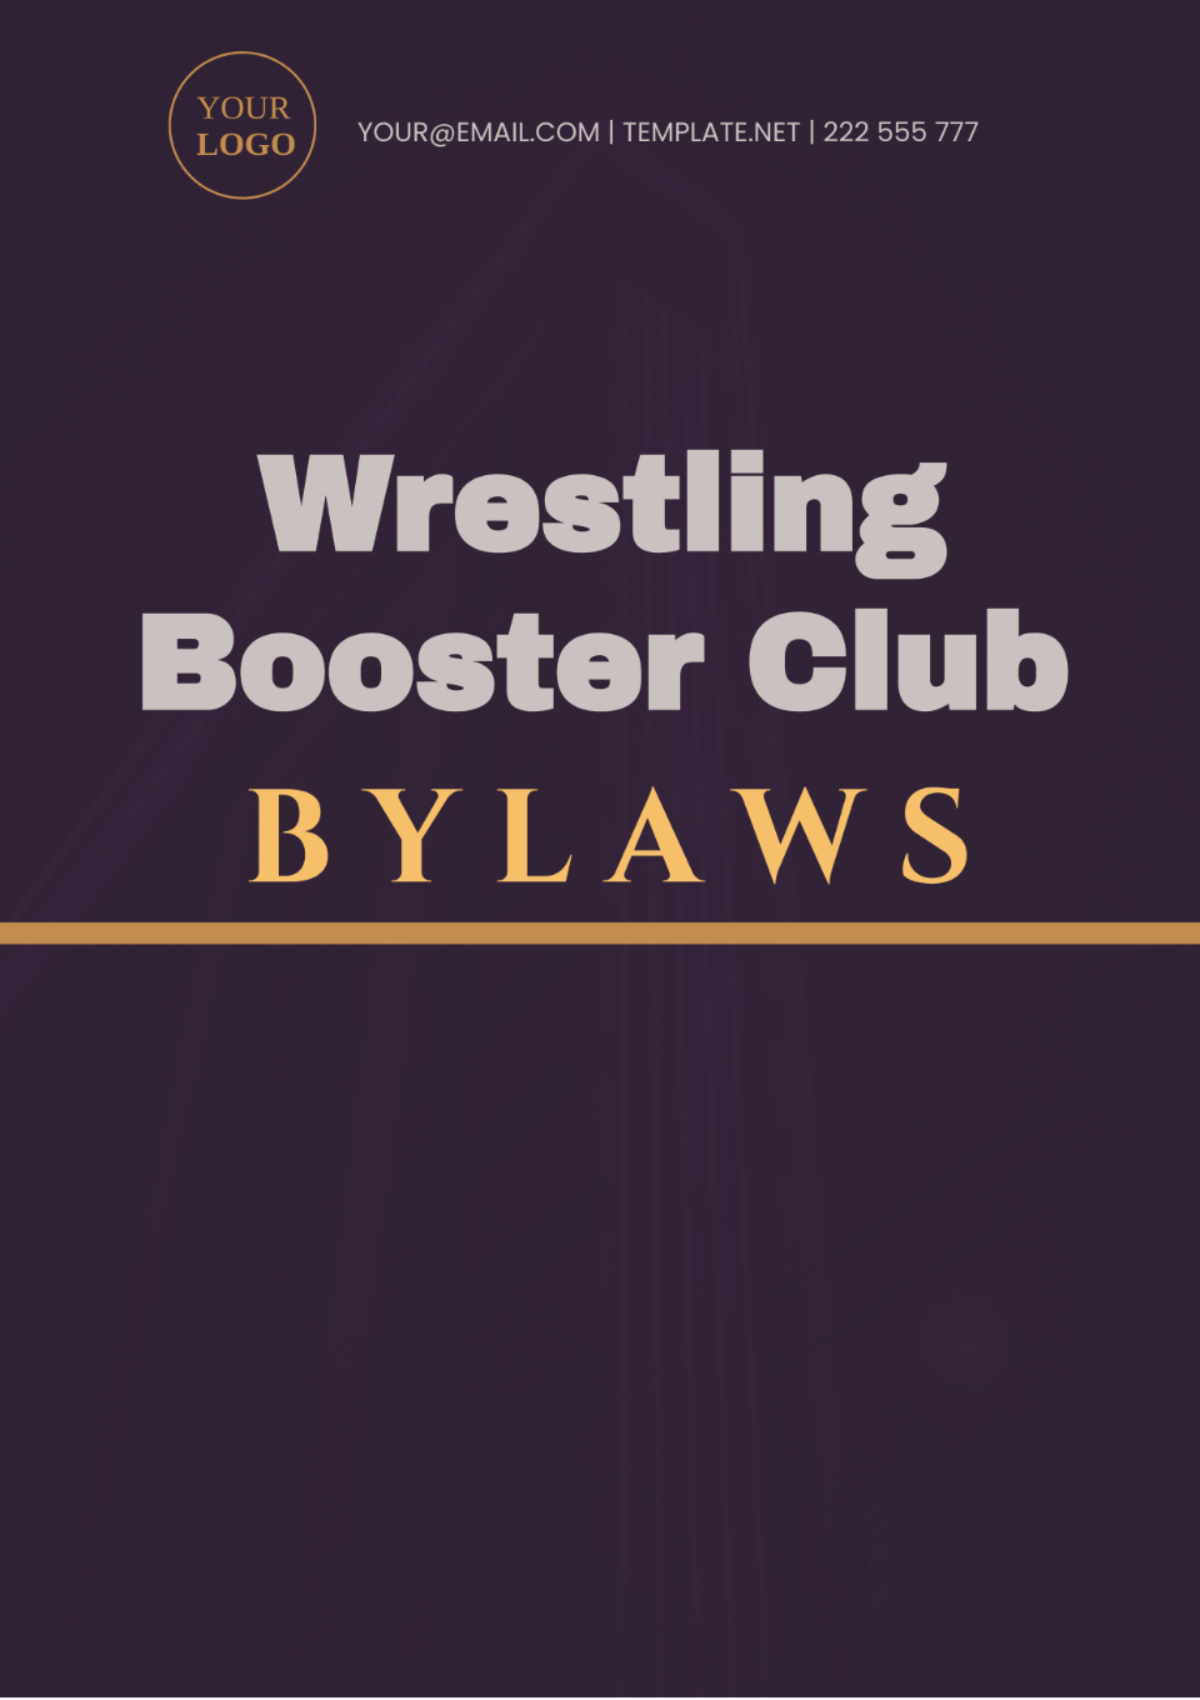 Wrestling Booster Club Bylaws Template